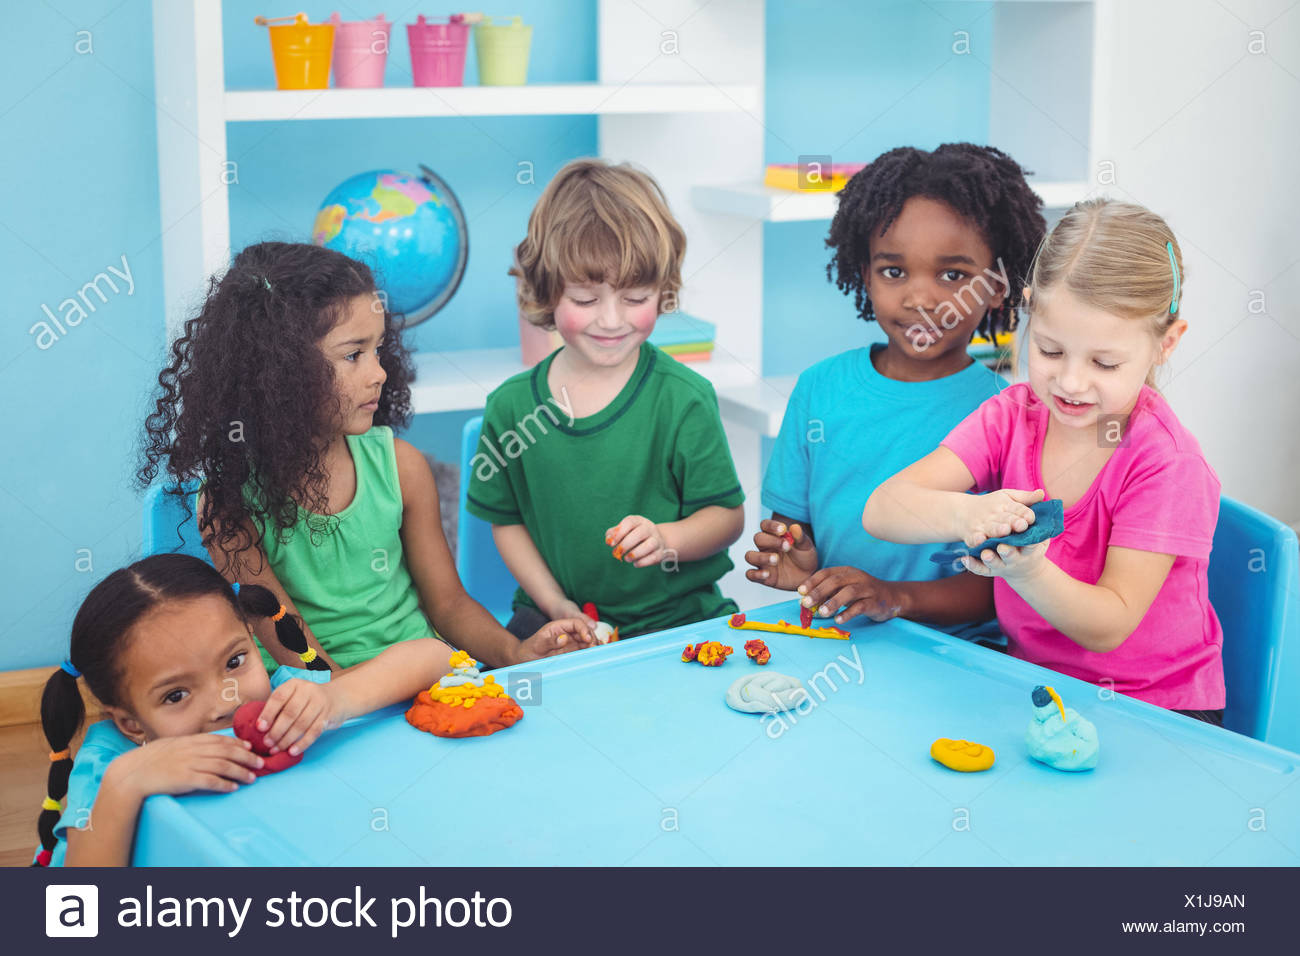 Smiling Kids Playing With Modelling Clay Stock Photo